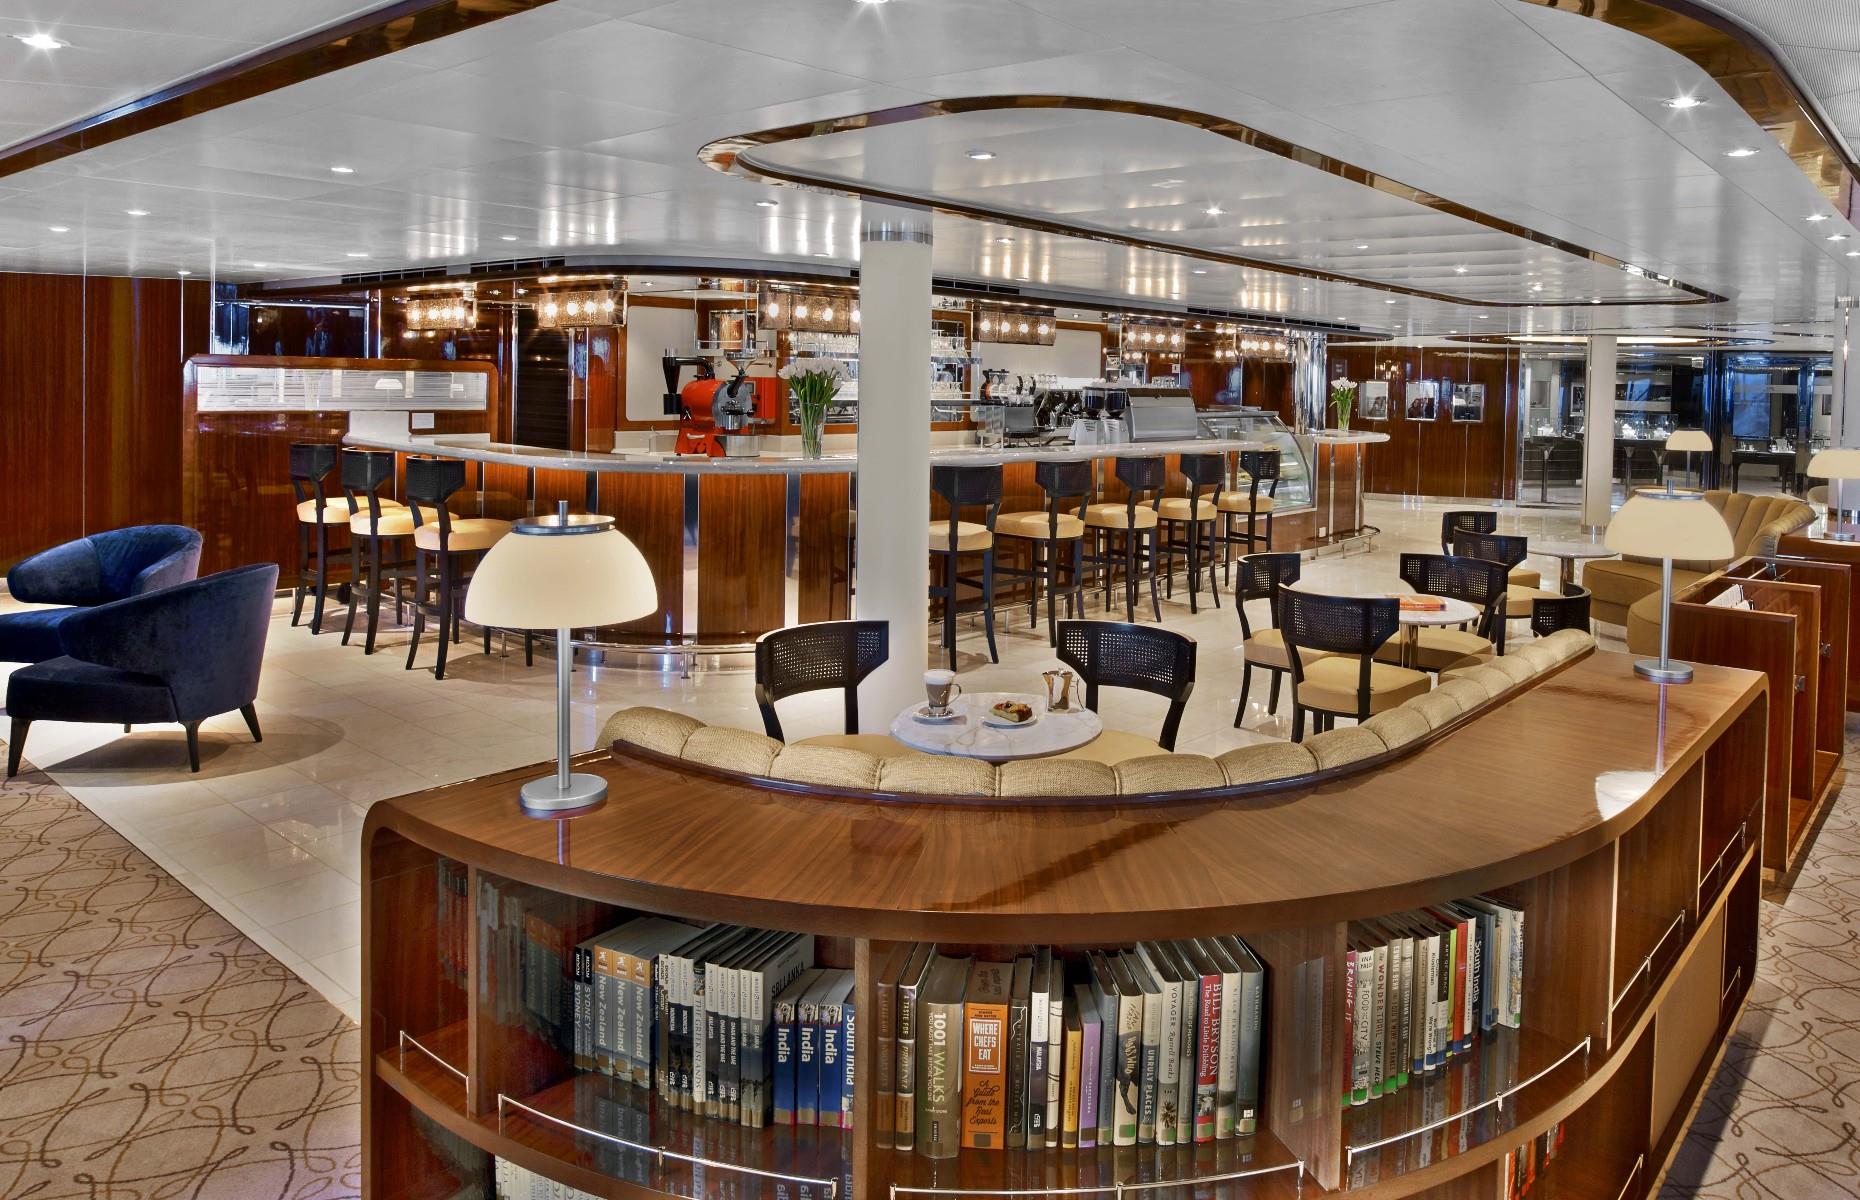 <p>Seabourn Square, designed to be an innovative concierge lounge, invites guests to access every shipboard service in a relaxed, living-room atmosphere. The Square's thoughtful layout includes a library, upscale shops, an outdoor terrace and a coffee bar, all arranged across a light-filled space with dark-wood accents, a subtle colour palette and striking blue velvet armchairs.</p>